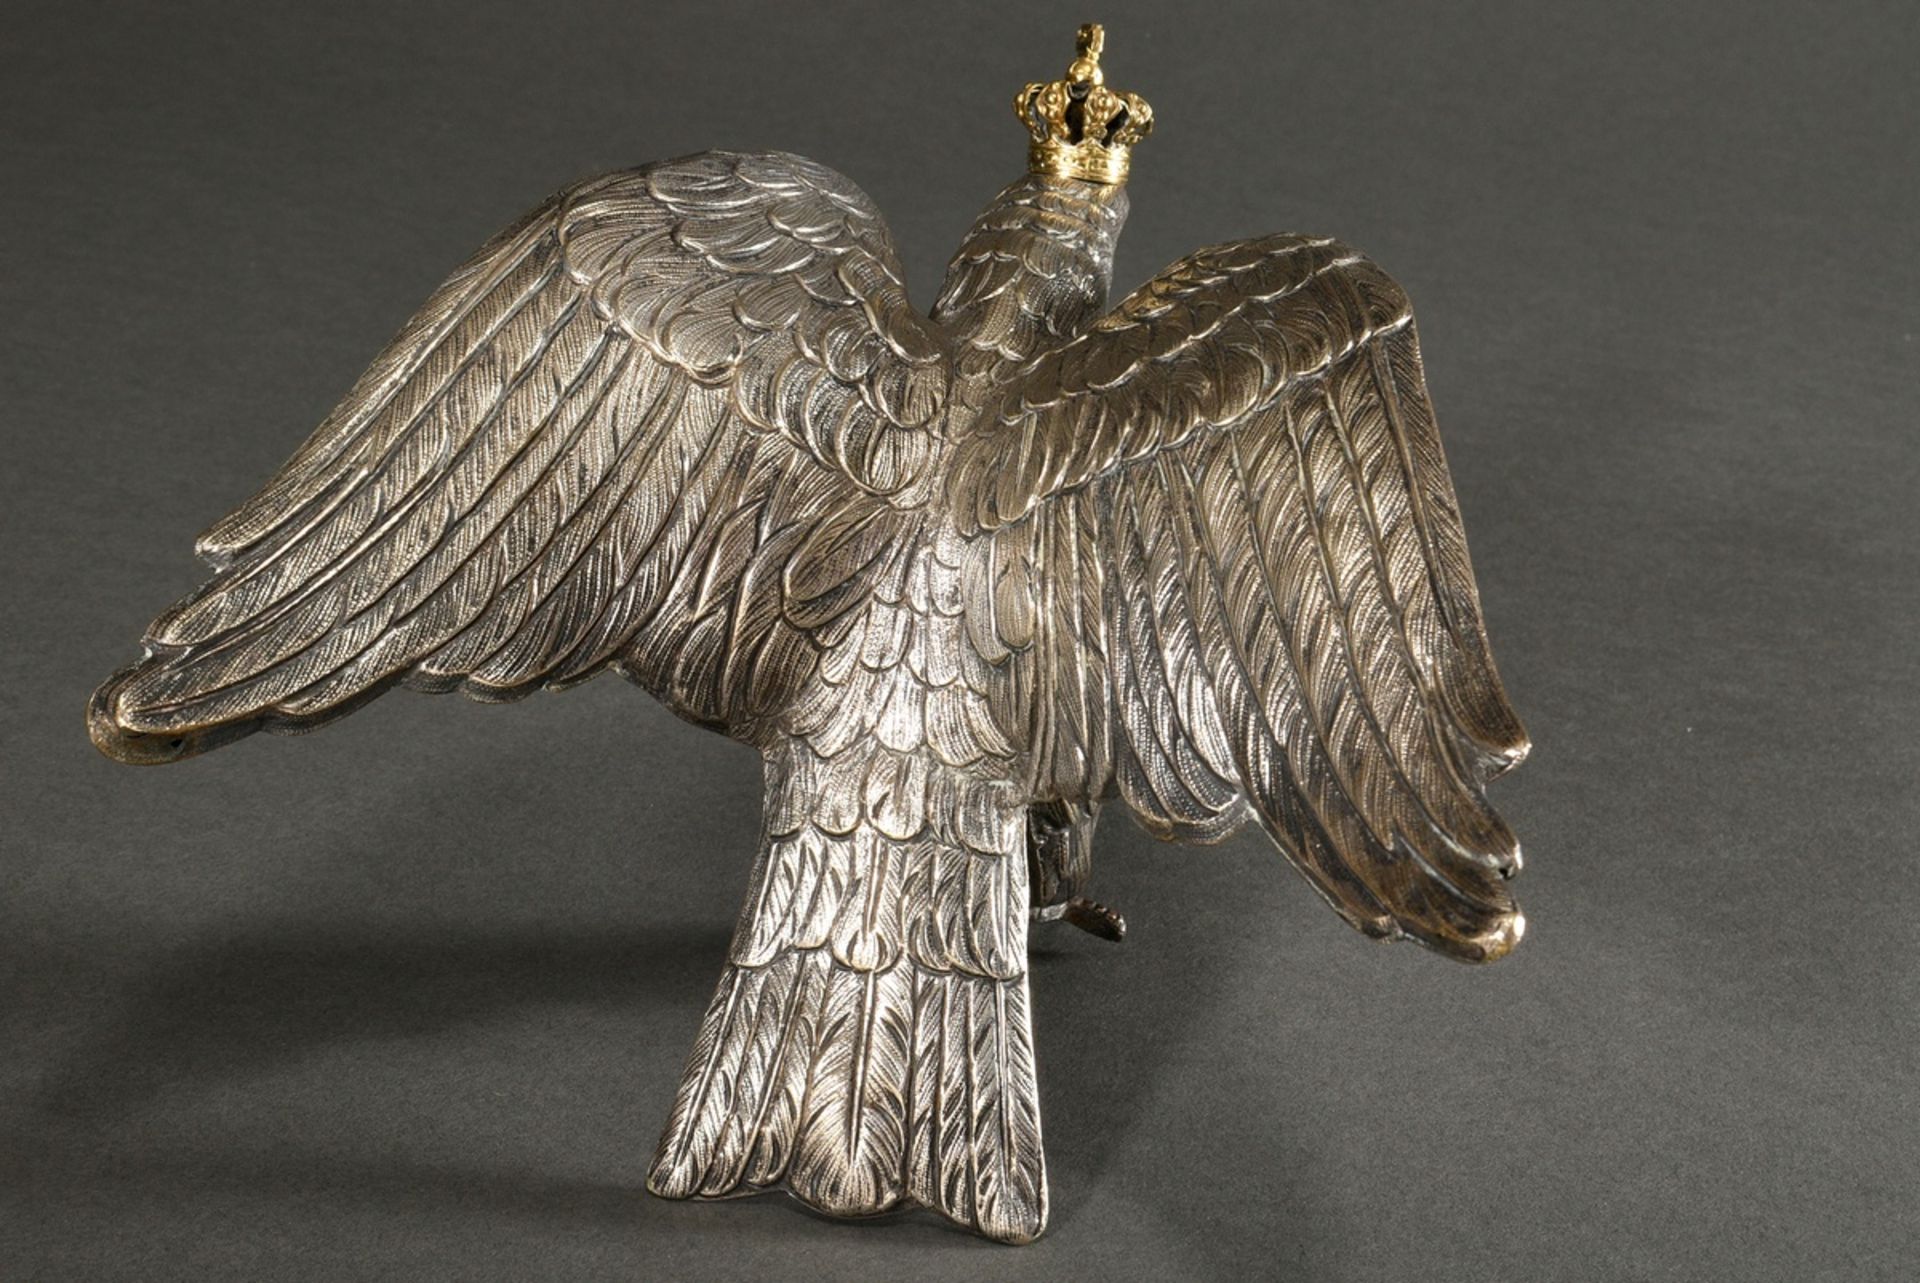 Wilhelmine eagle with German imperial crown in finely chiselled design, approx. 1880/1900, silver-p - Image 8 of 8